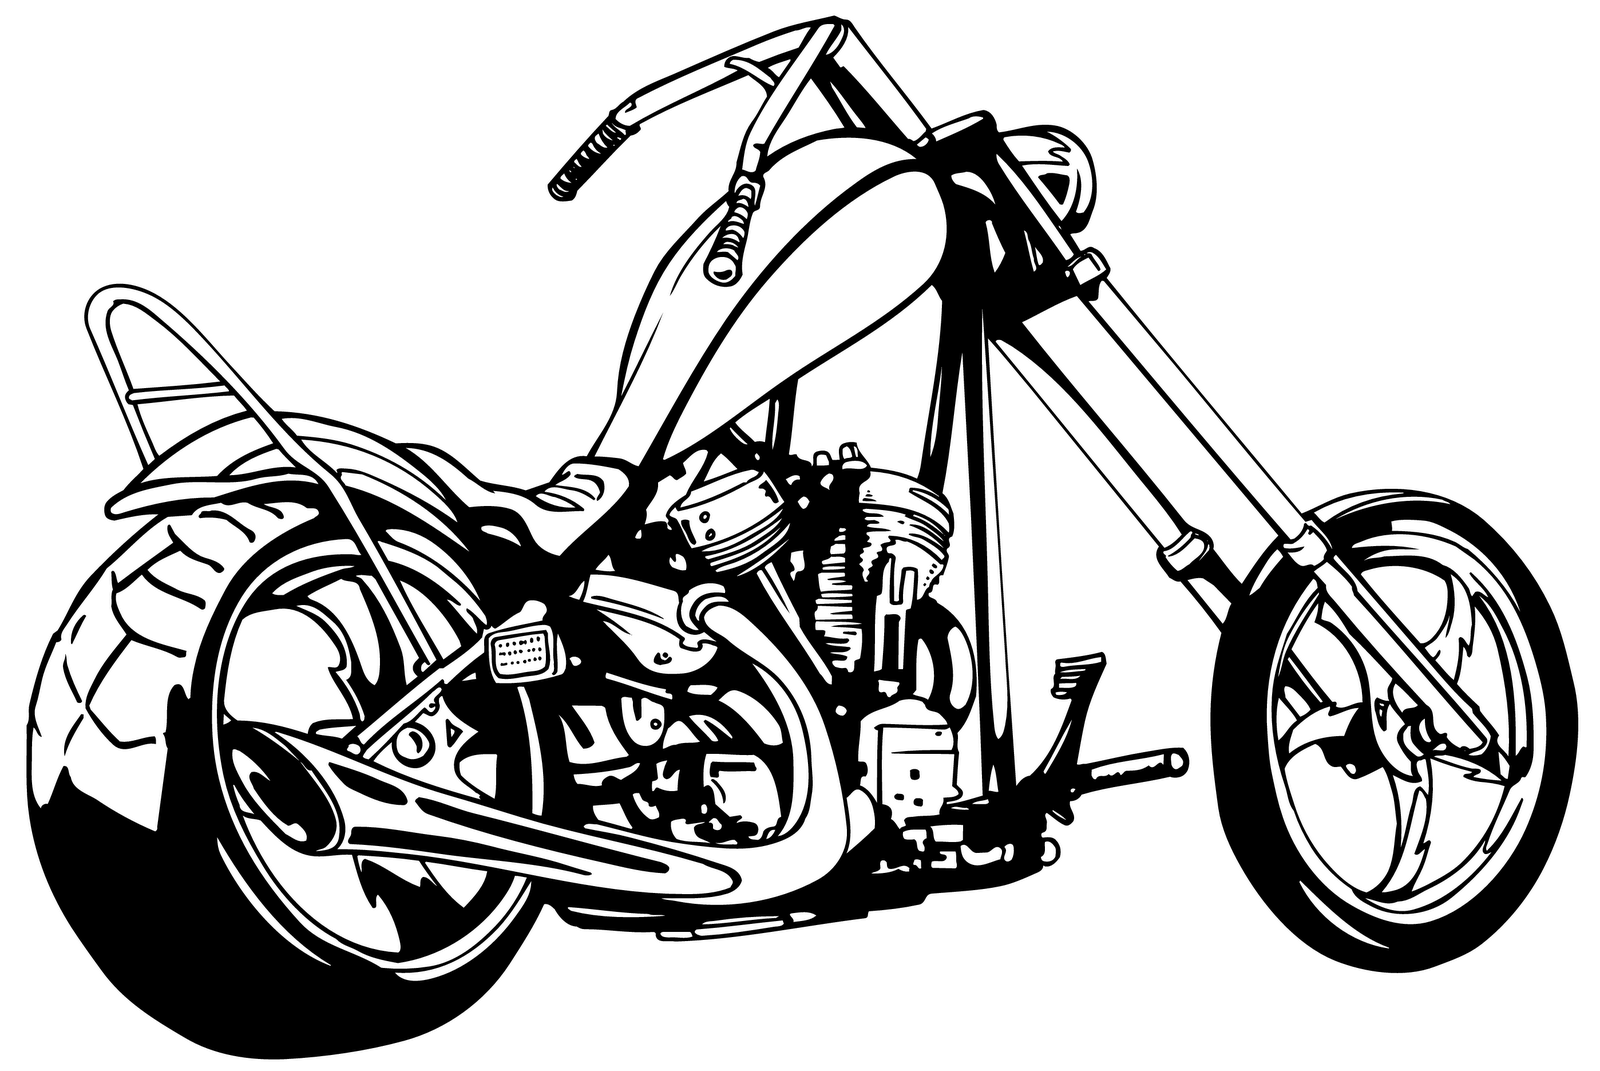 Motorcycle Tribal Clipart Black And White | Clipart Panda - Free ...